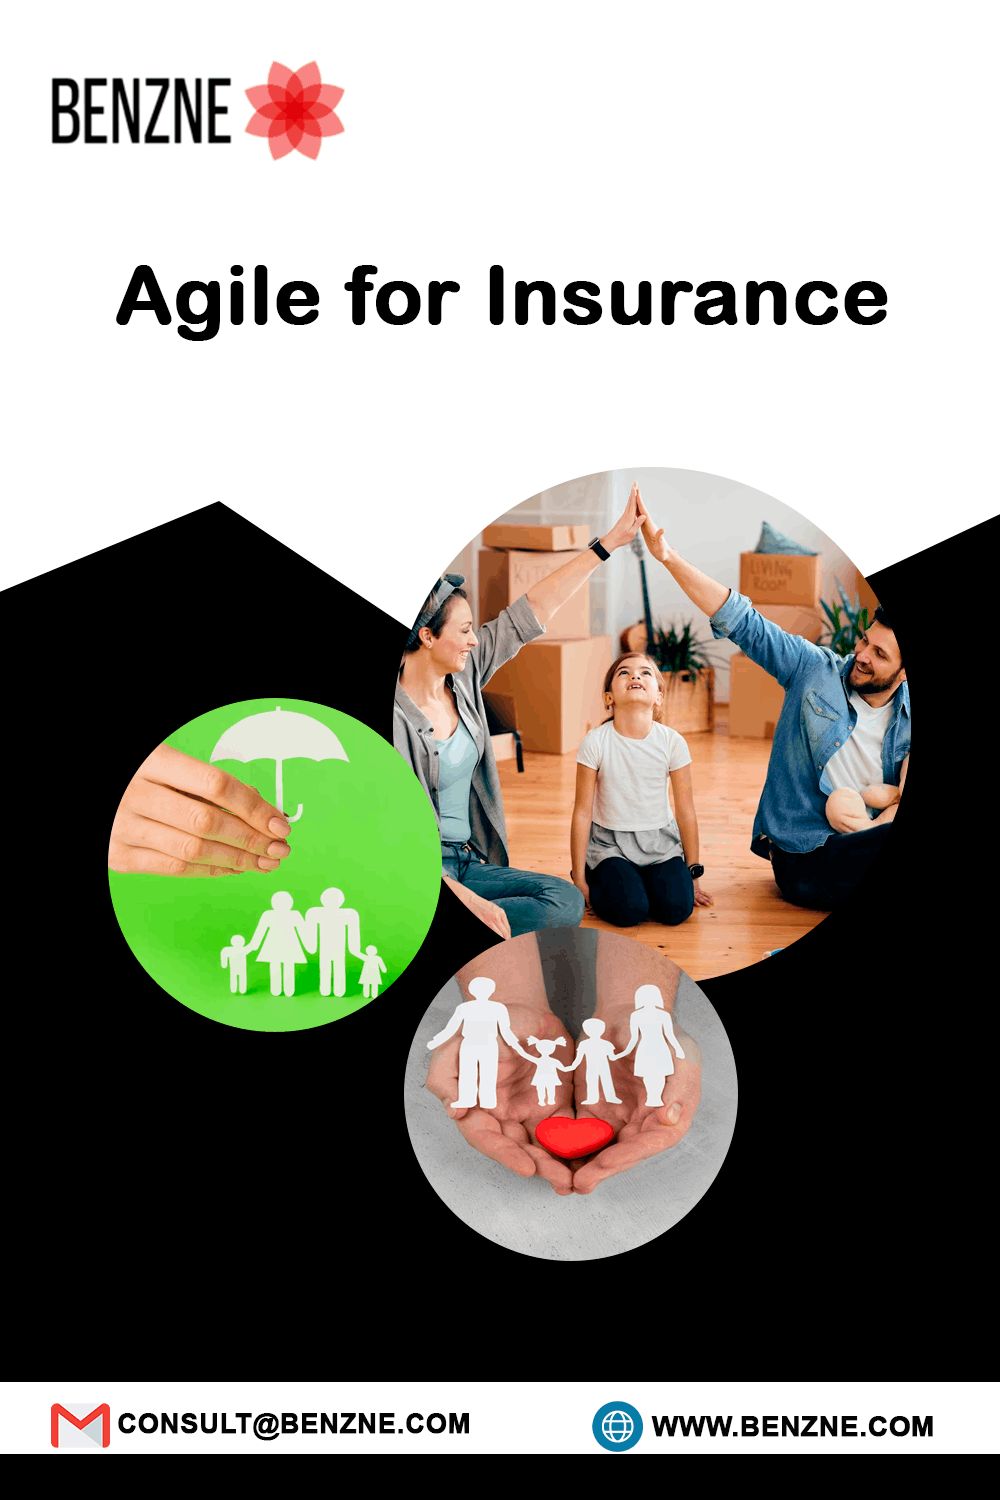 Understand & Implement The Agile For Insurance In A Better Way With Benzne